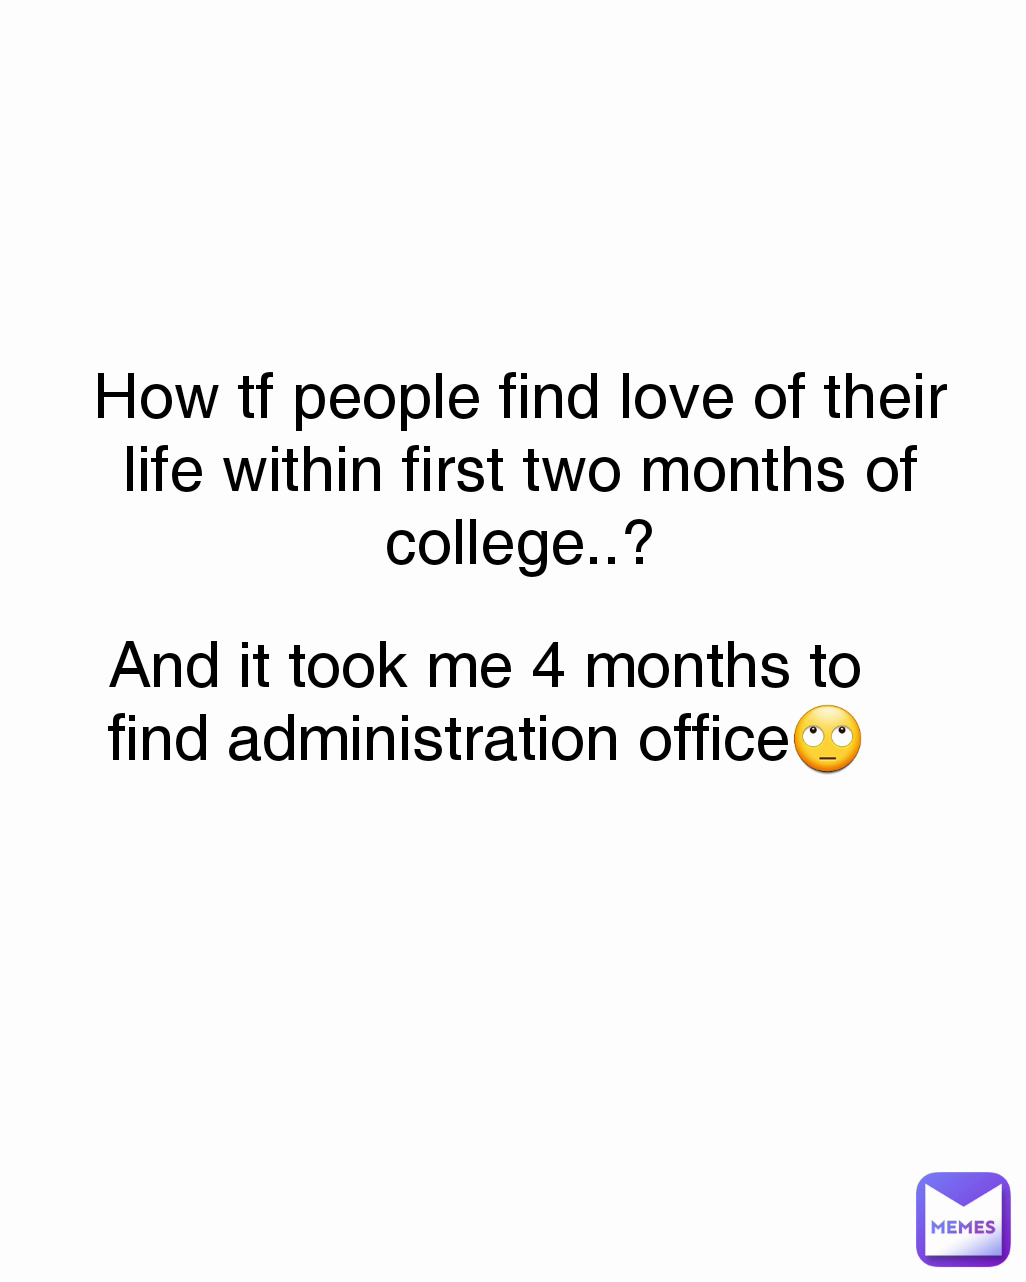 How tf people find love of their life within first two months of college..?

 And it took me 4 months to find administration office🙄